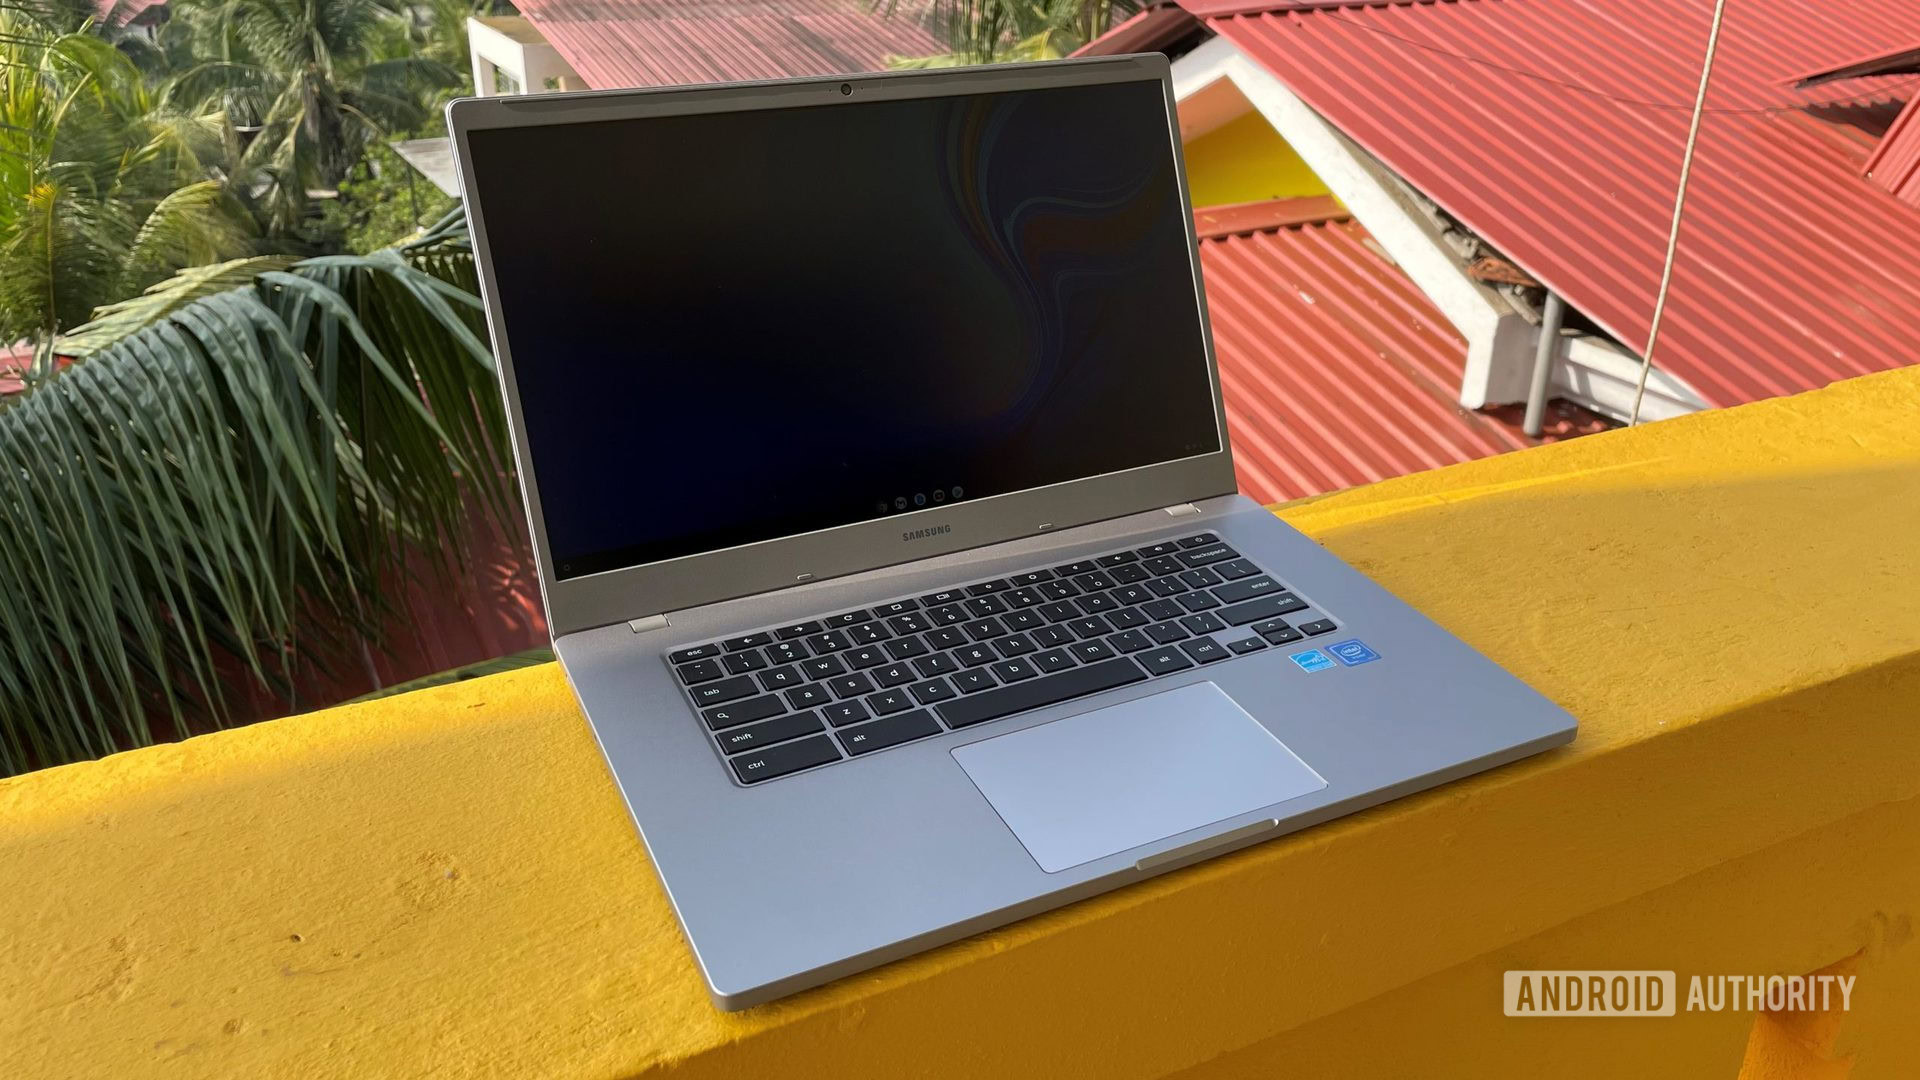 Samsung Chromebook 4 Plus review: Basic, wallet-friendly goodness